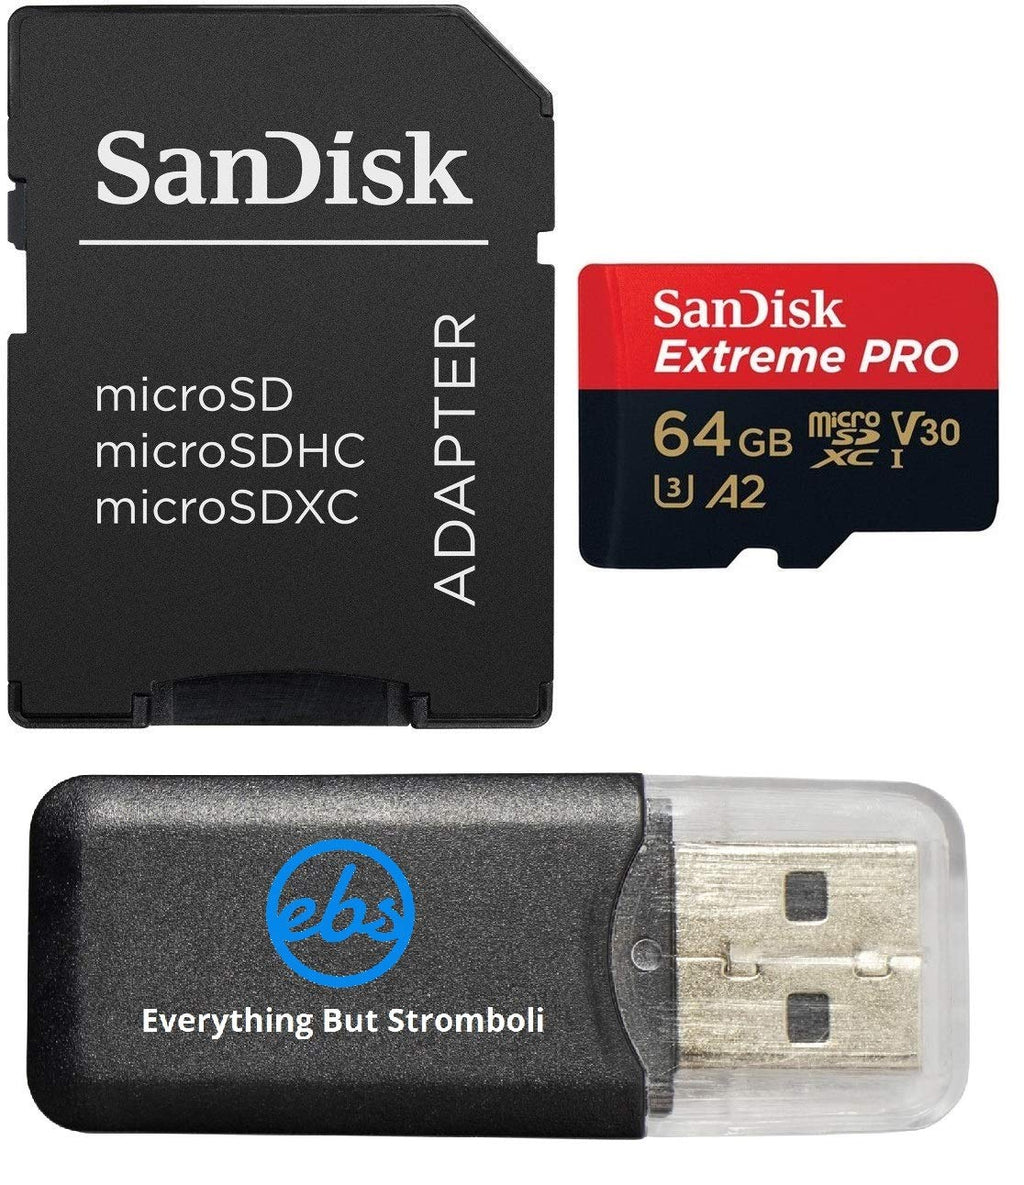  [AUSTRALIA] - Sandisk 64GB Extreme Pro 4K Memory Card works with Samsung Galaxy S9, S9+, S8, S8 Plus, Note 8, S7, S7 Edge - UHS-1 V30 Micro (SDSQXCG-064G-GN6MA) with Everything But Stromboli (TM) Card Reader